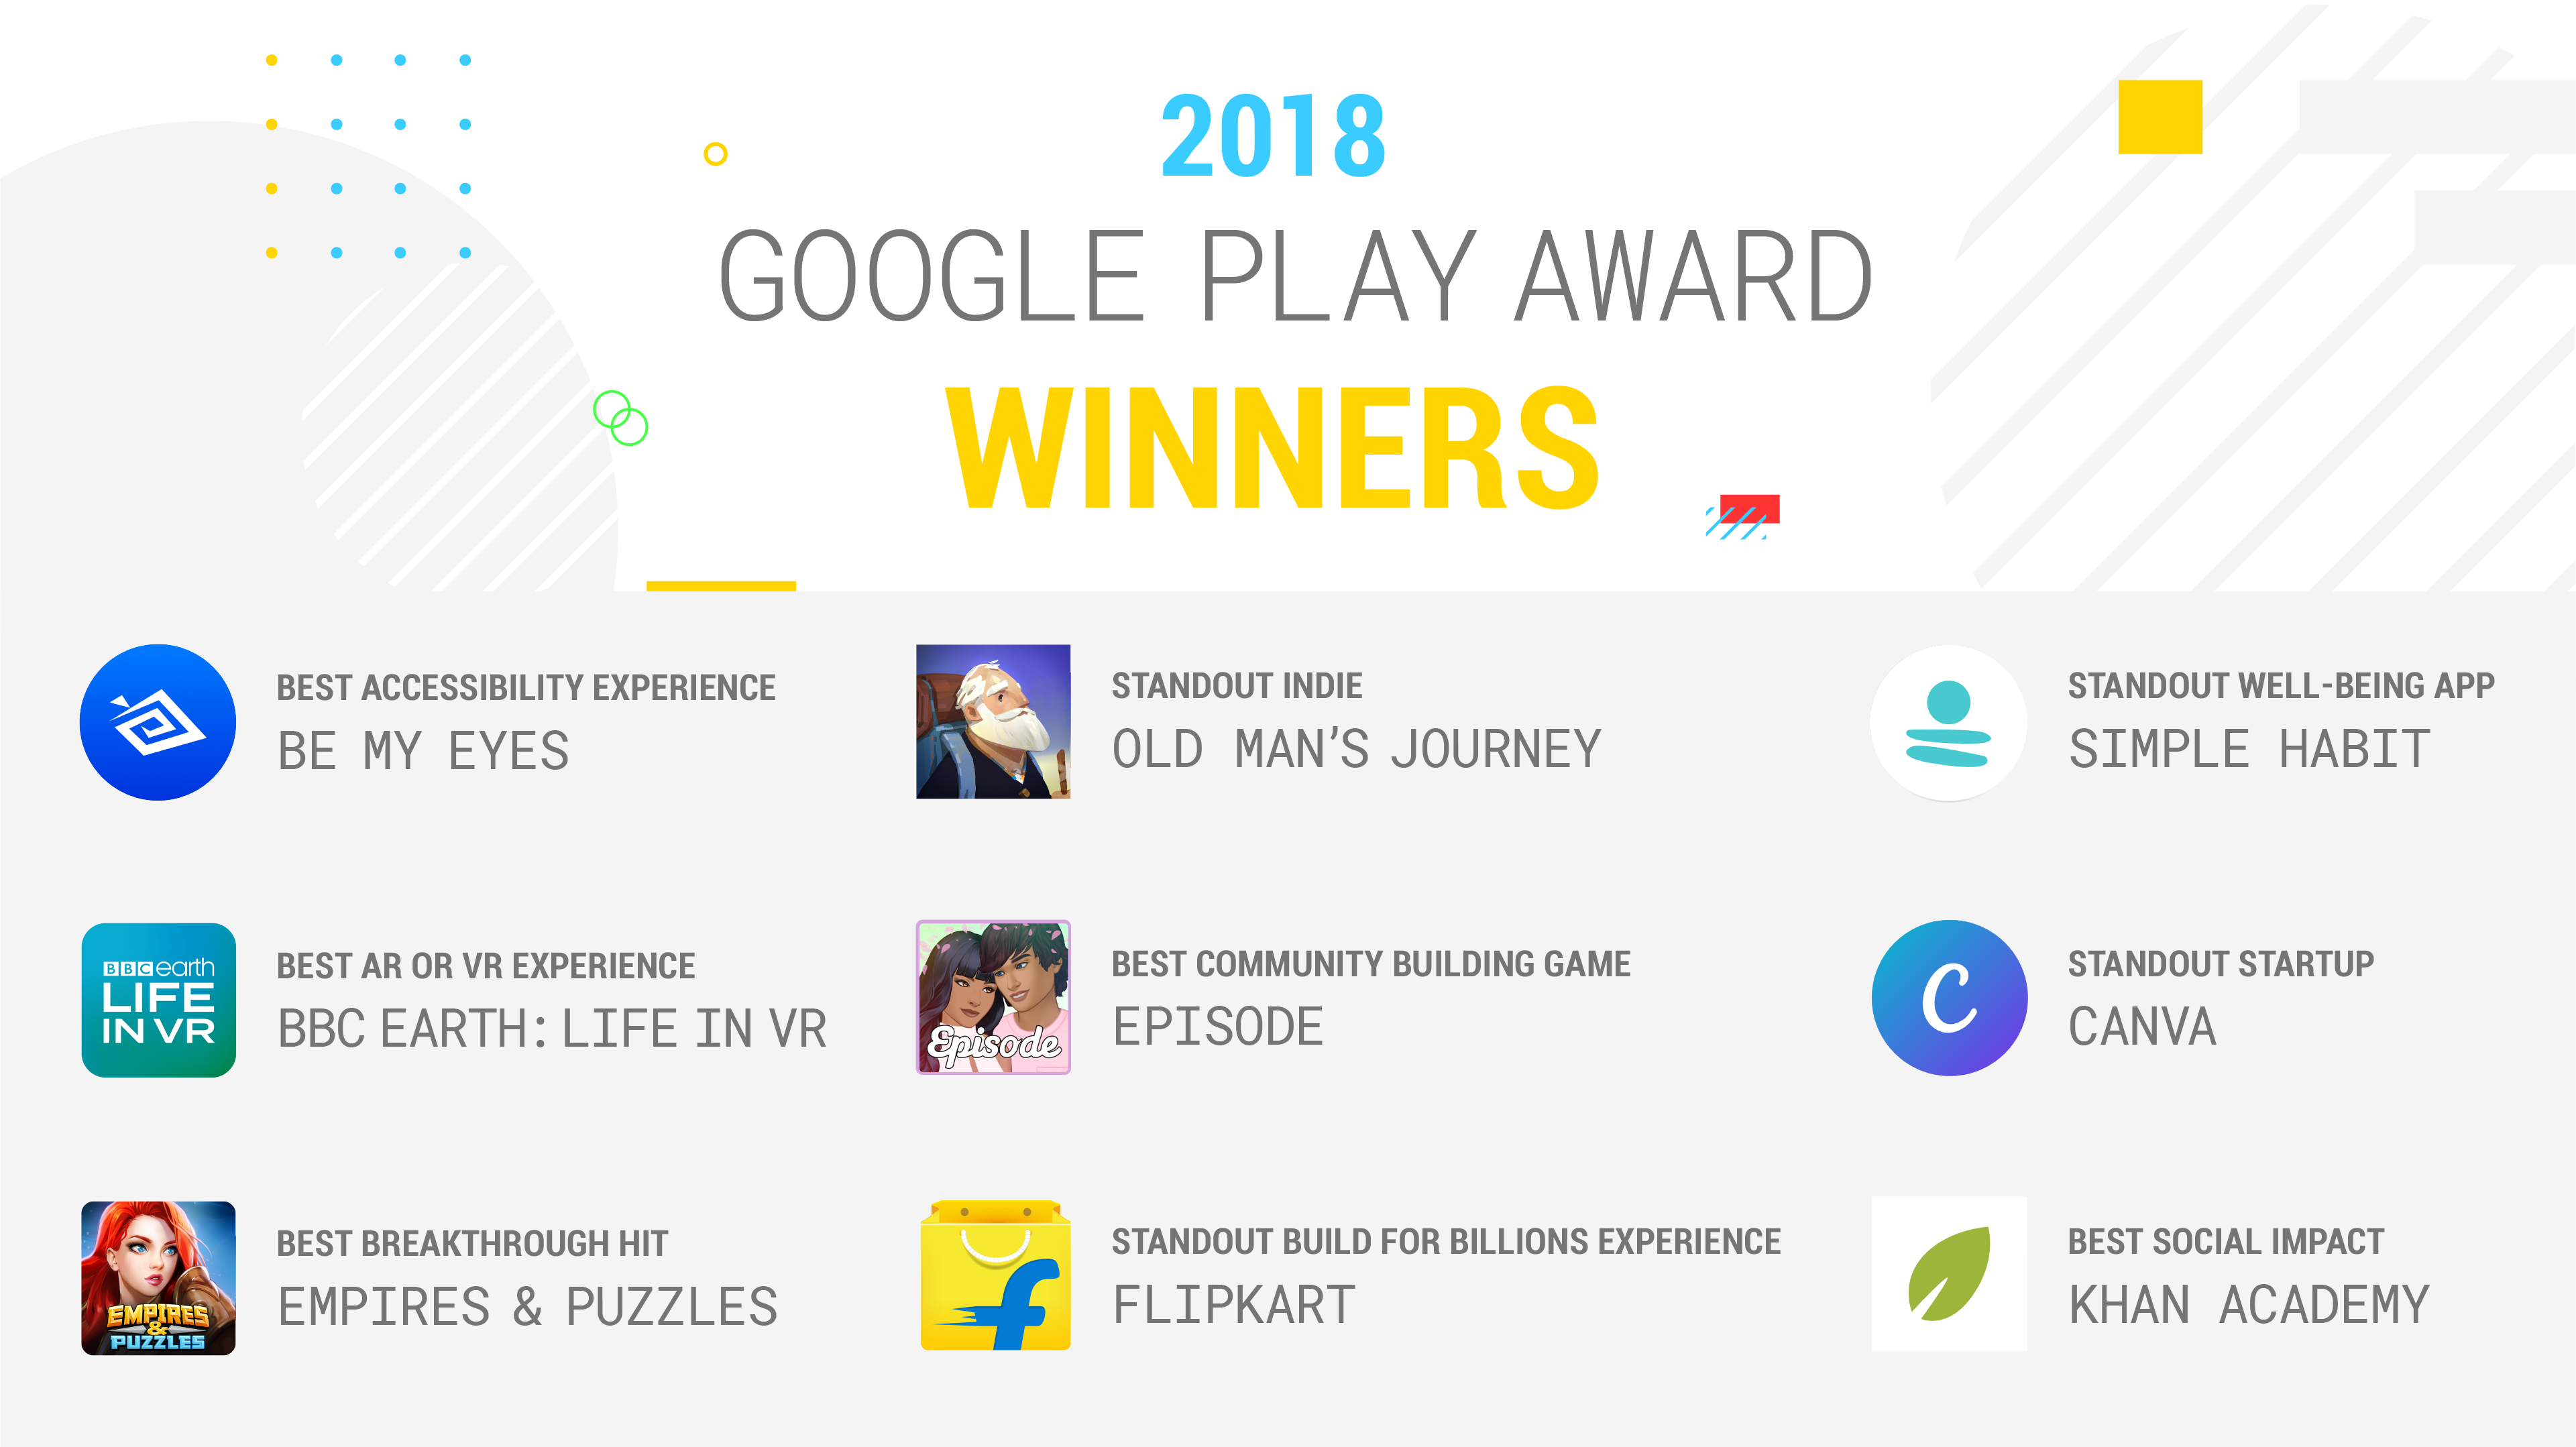 2018 Google Play Award winners highlight the top Android apps and games